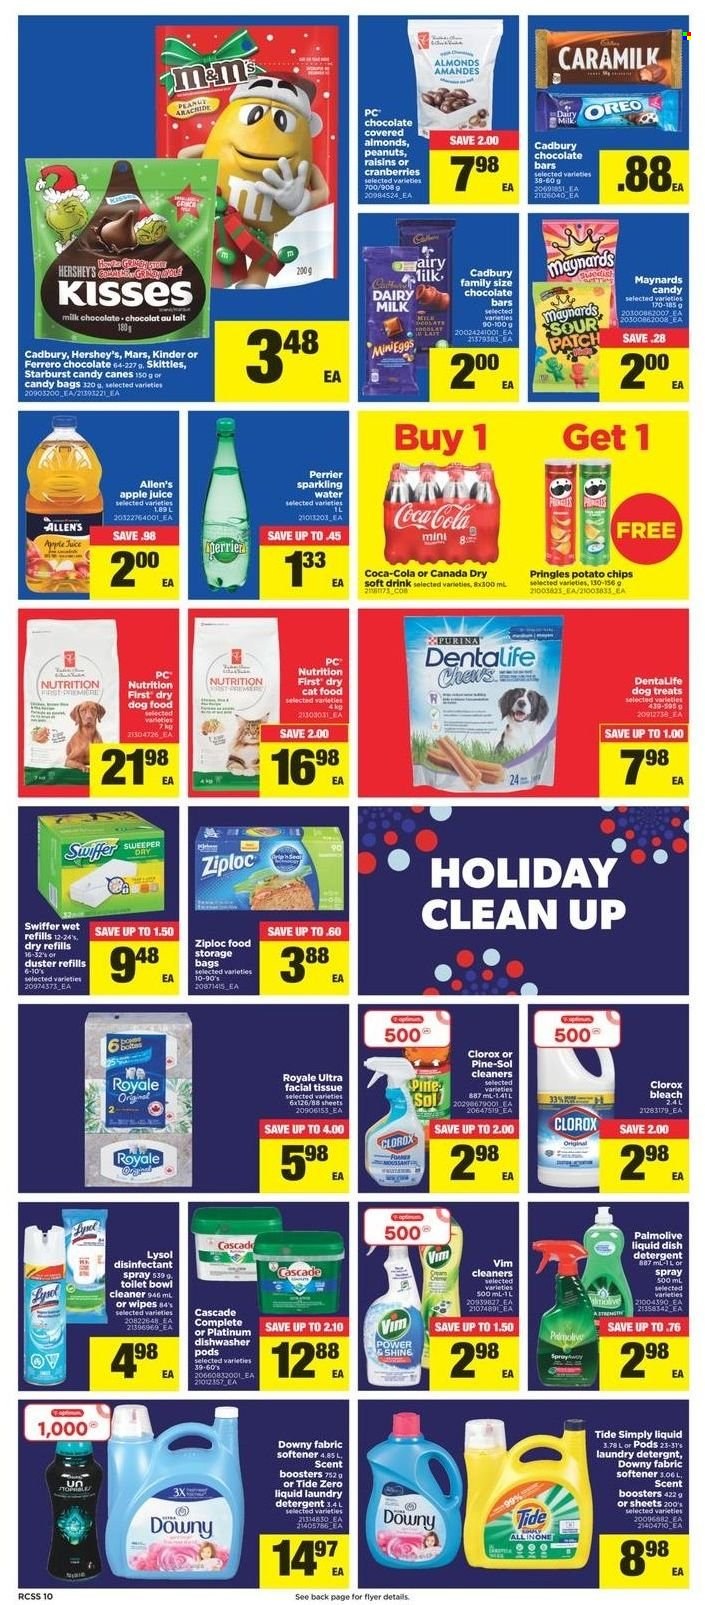 thumbnail - Real Canadian Superstore Flyer - December 02, 2021 - December 08, 2021 - Sales products - Hershey's, milk chocolate, Mars, Cadbury, Dairy Milk, Skittles, Starburst, Sour Patch, potato chips, Pringles, cranberries, almonds, peanuts, apple juice, Canada Dry, Coca-Cola, juice, soft drink, Perrier, sparkling water, wipes, tissues, cleaner, bleach, Lysol, Clorox, Pine-Sol, Swiffer, Tide, fabric softener, laundry detergent, Cascade, scent booster, Downy Laundry, Palmolive, Ziploc, storage bag, duster, animal food, cat food, dog food, Purina, Dentalife, dry dog food, dry cat food, Oreo, detergent, chips, Ferrero Rocher, desinfection. Page 10.